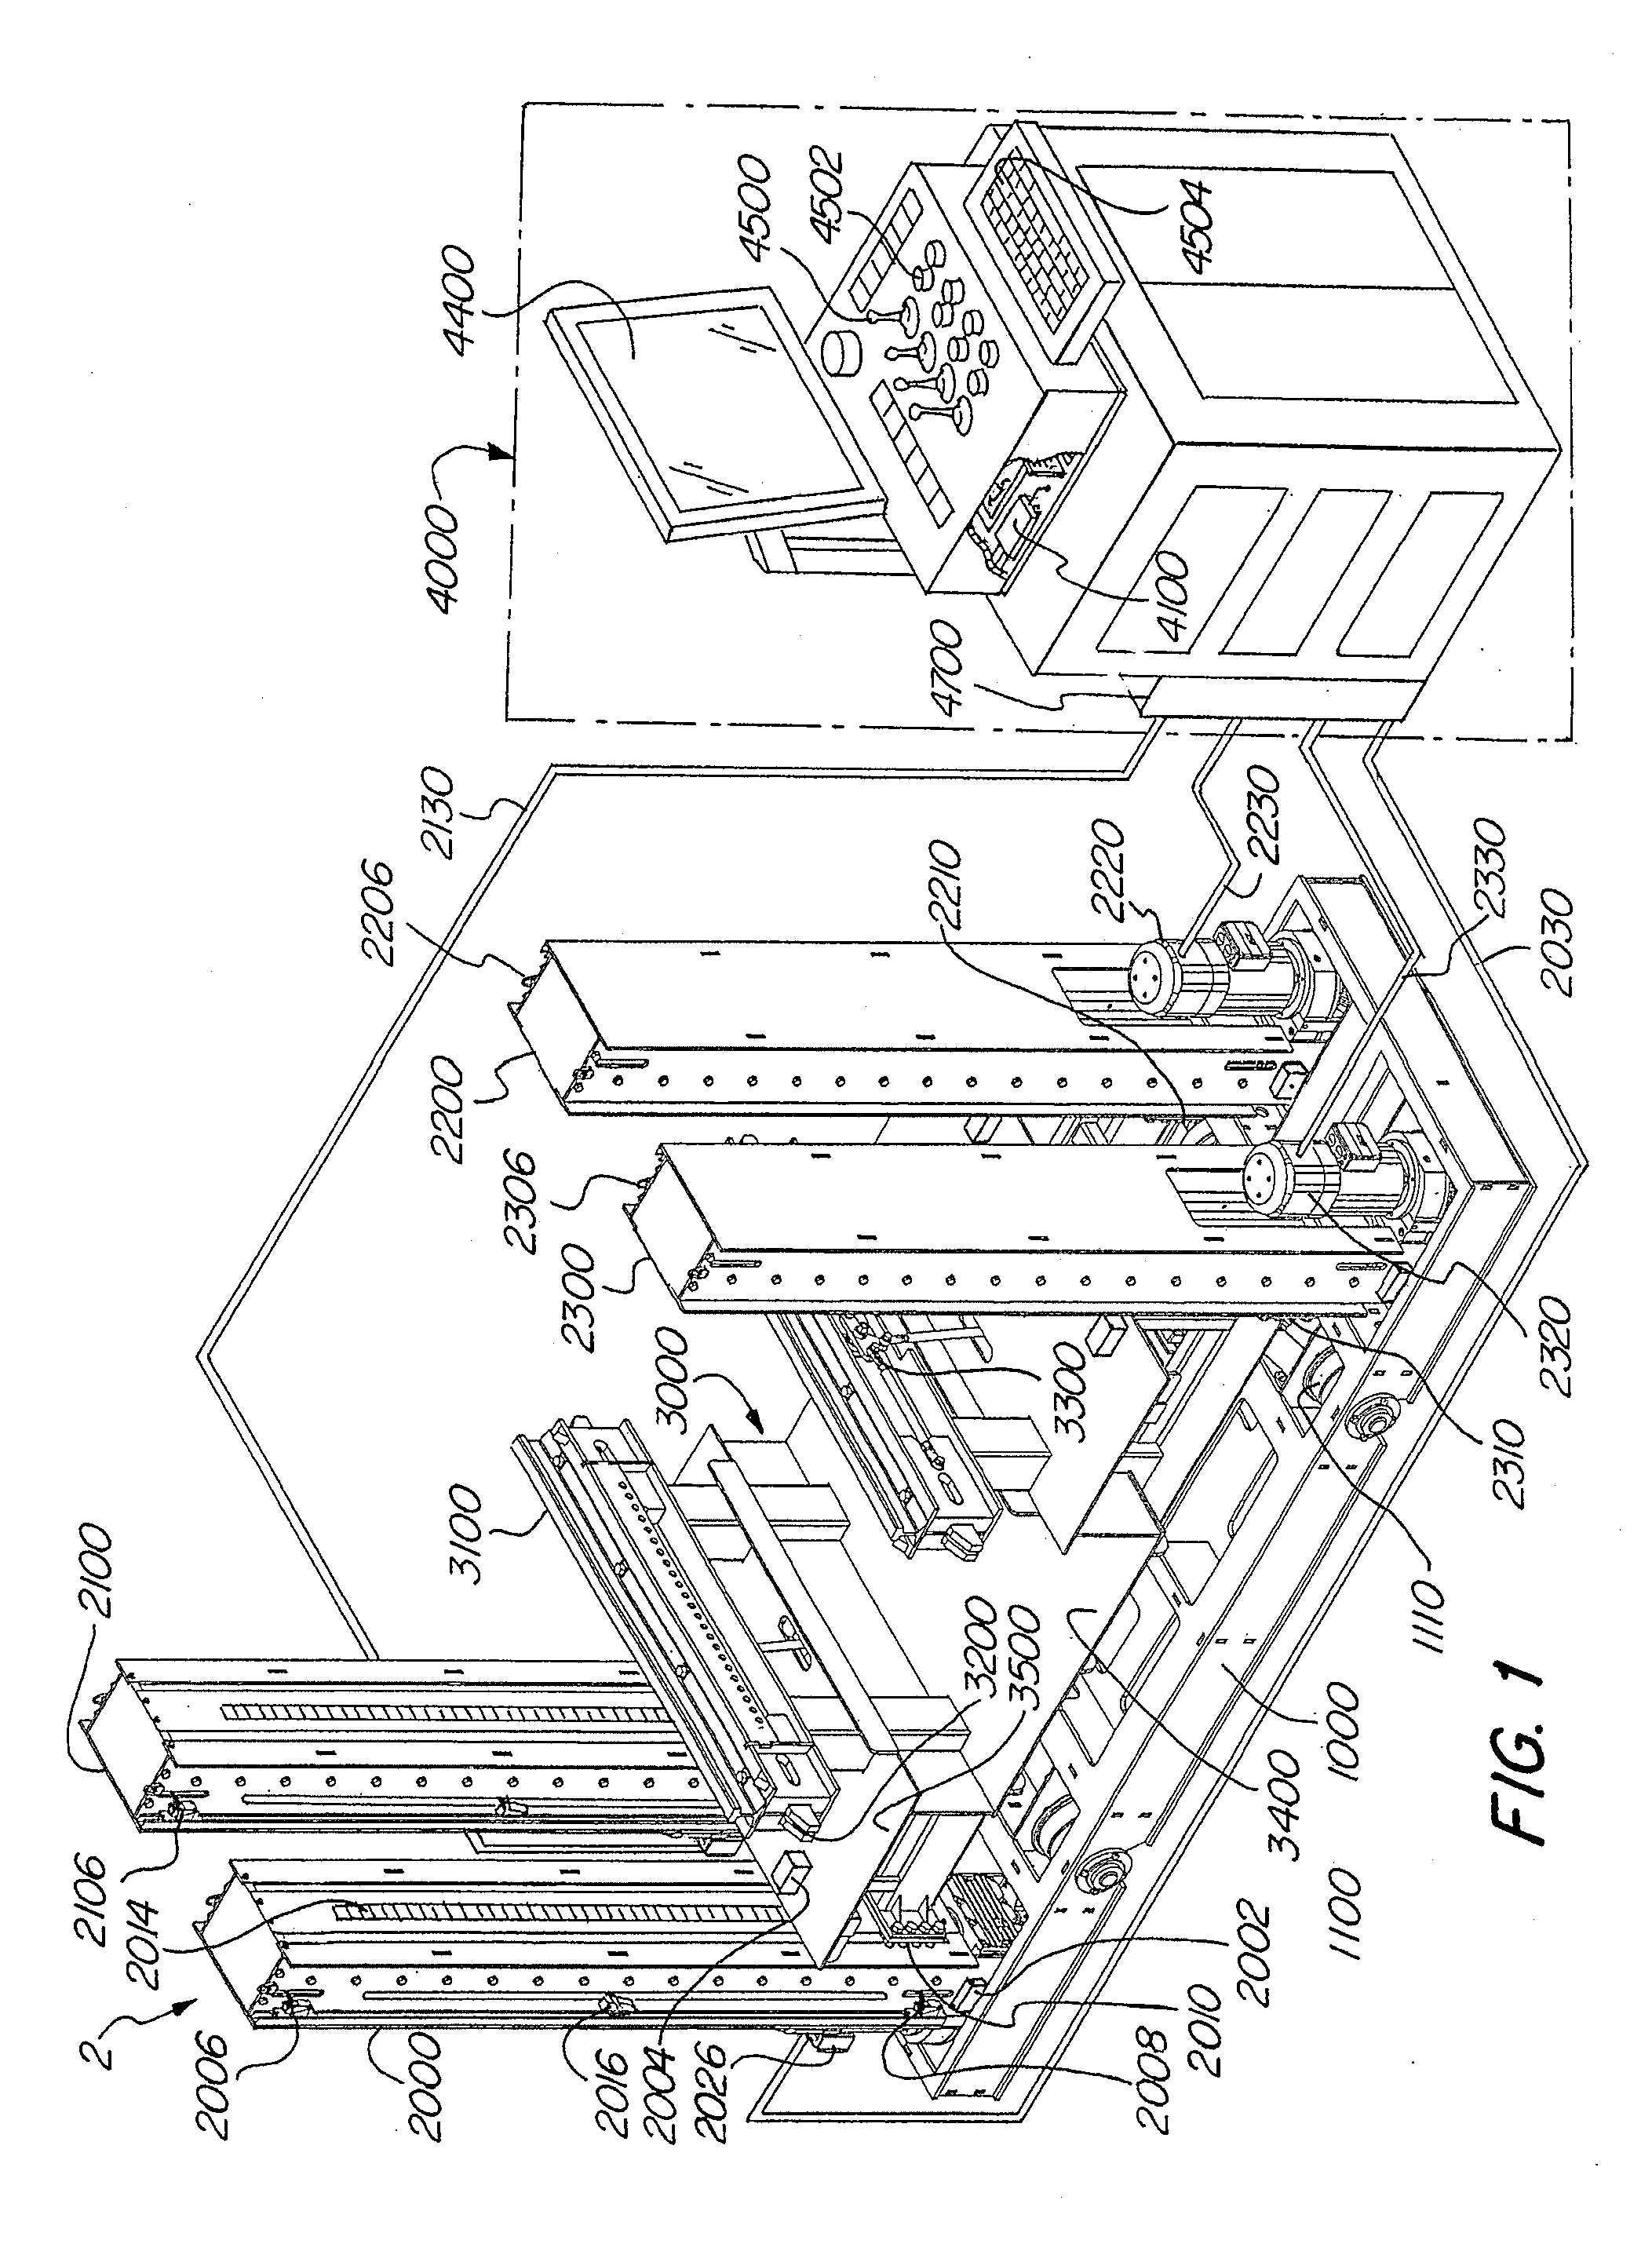 Machinery Positioning Apparatus Having Independent Drive Columns